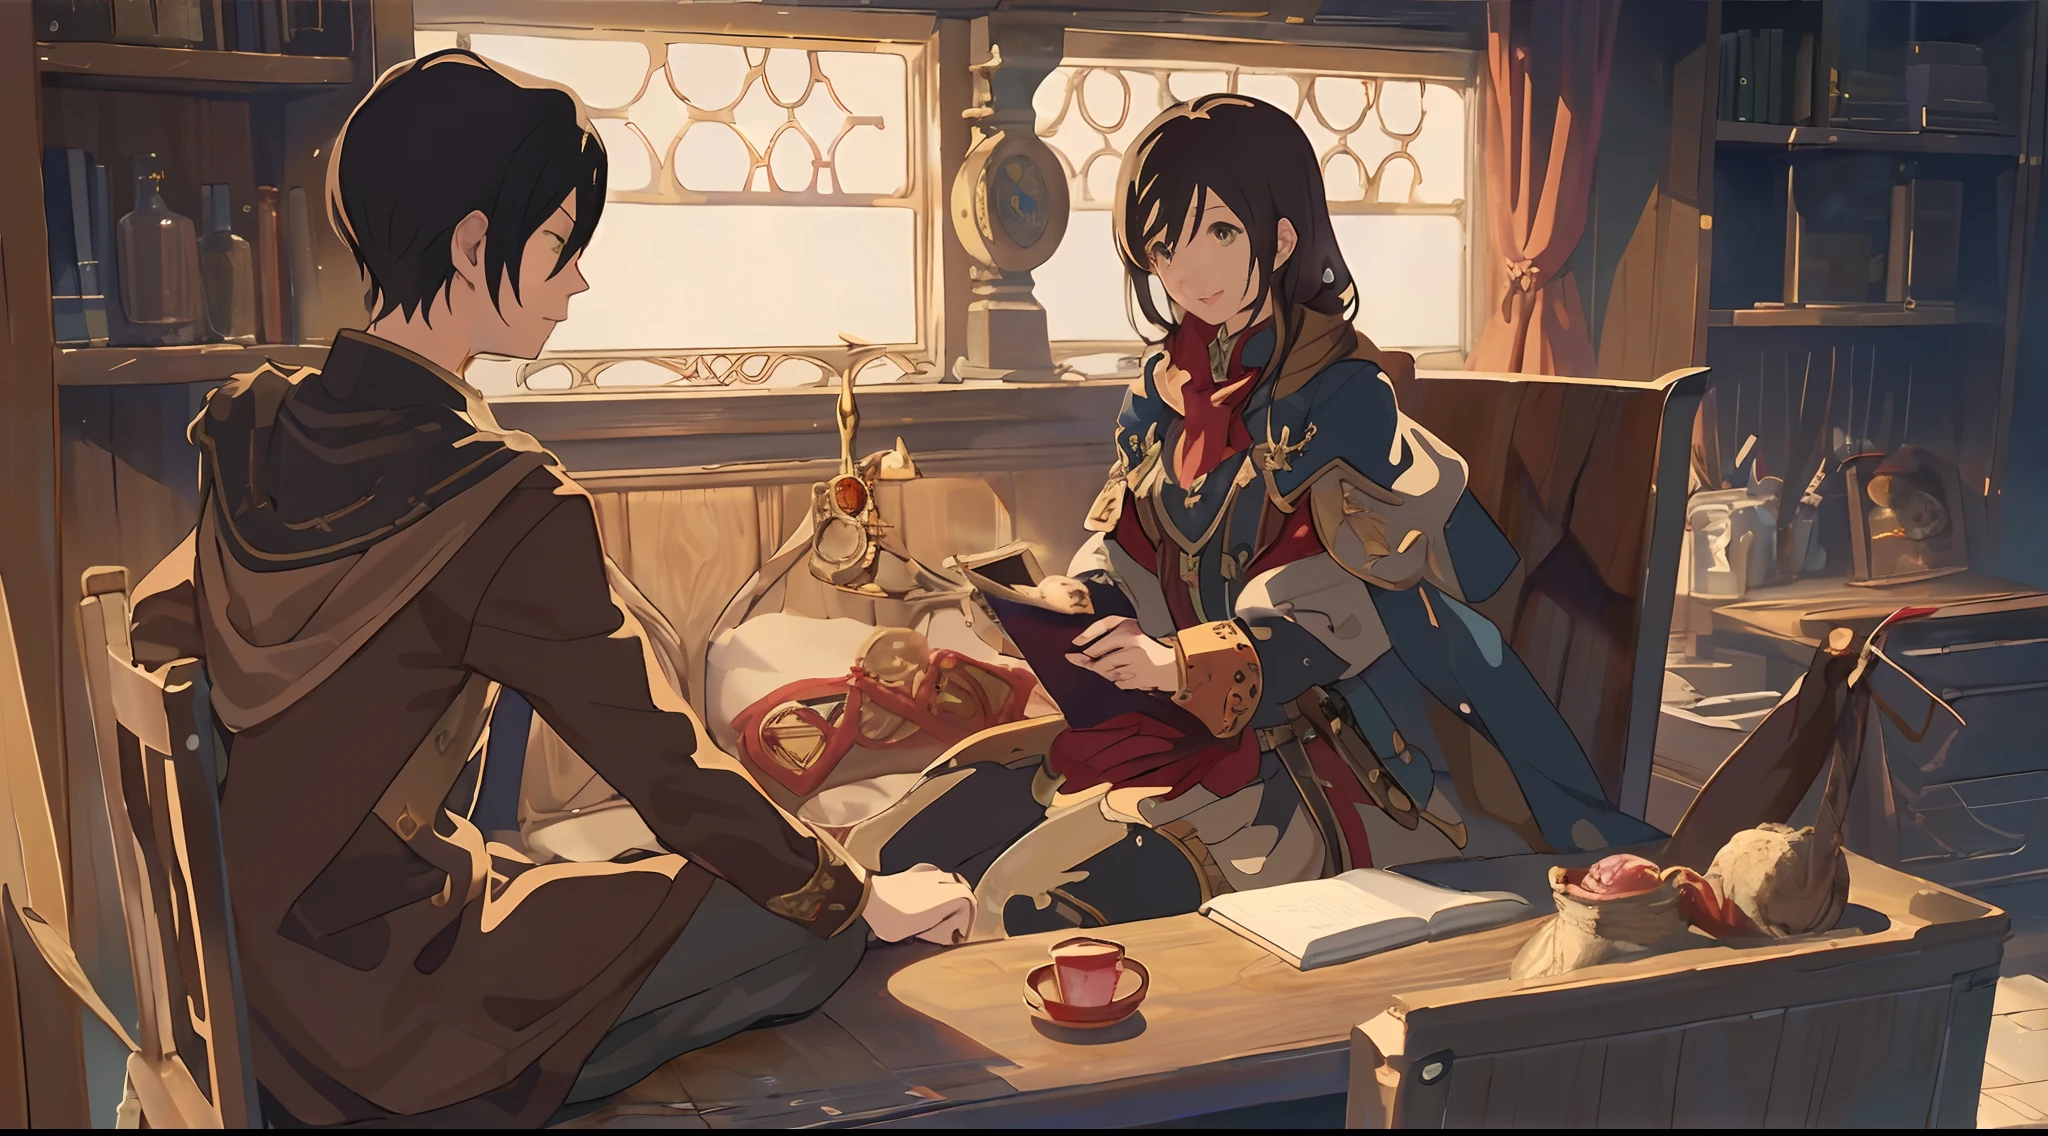 (best quality,PIXIV:1.2), intimate interaction,medieval theme,subtle yet distant,unrequited love,vibrant colors,steampunk elements, dreamy atmosphere, religious undertones